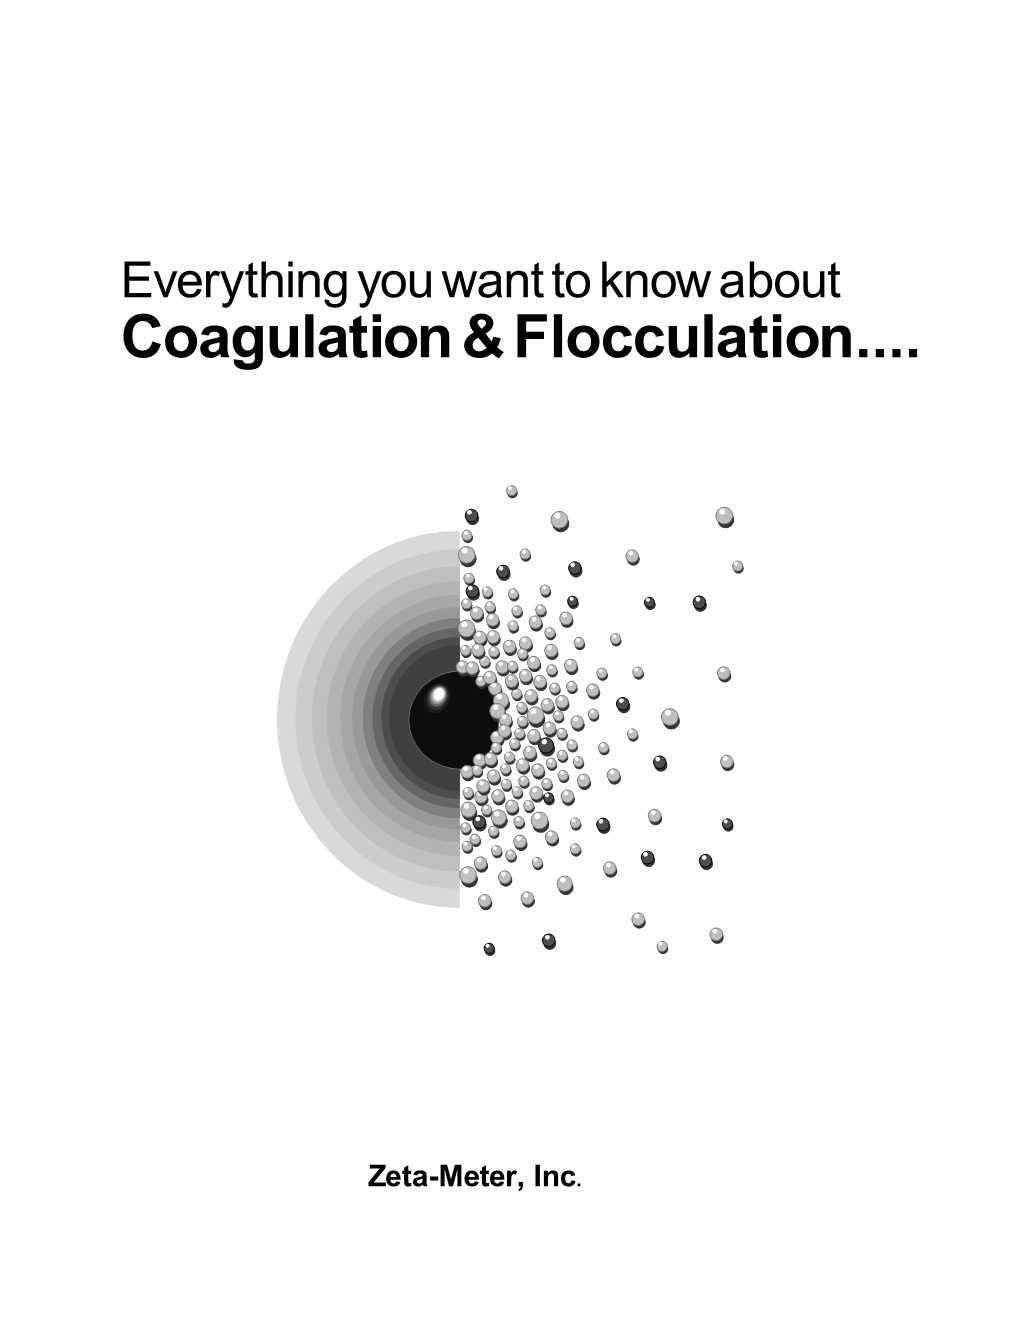 Everything You Want to Know About Coagulation & Flocculation